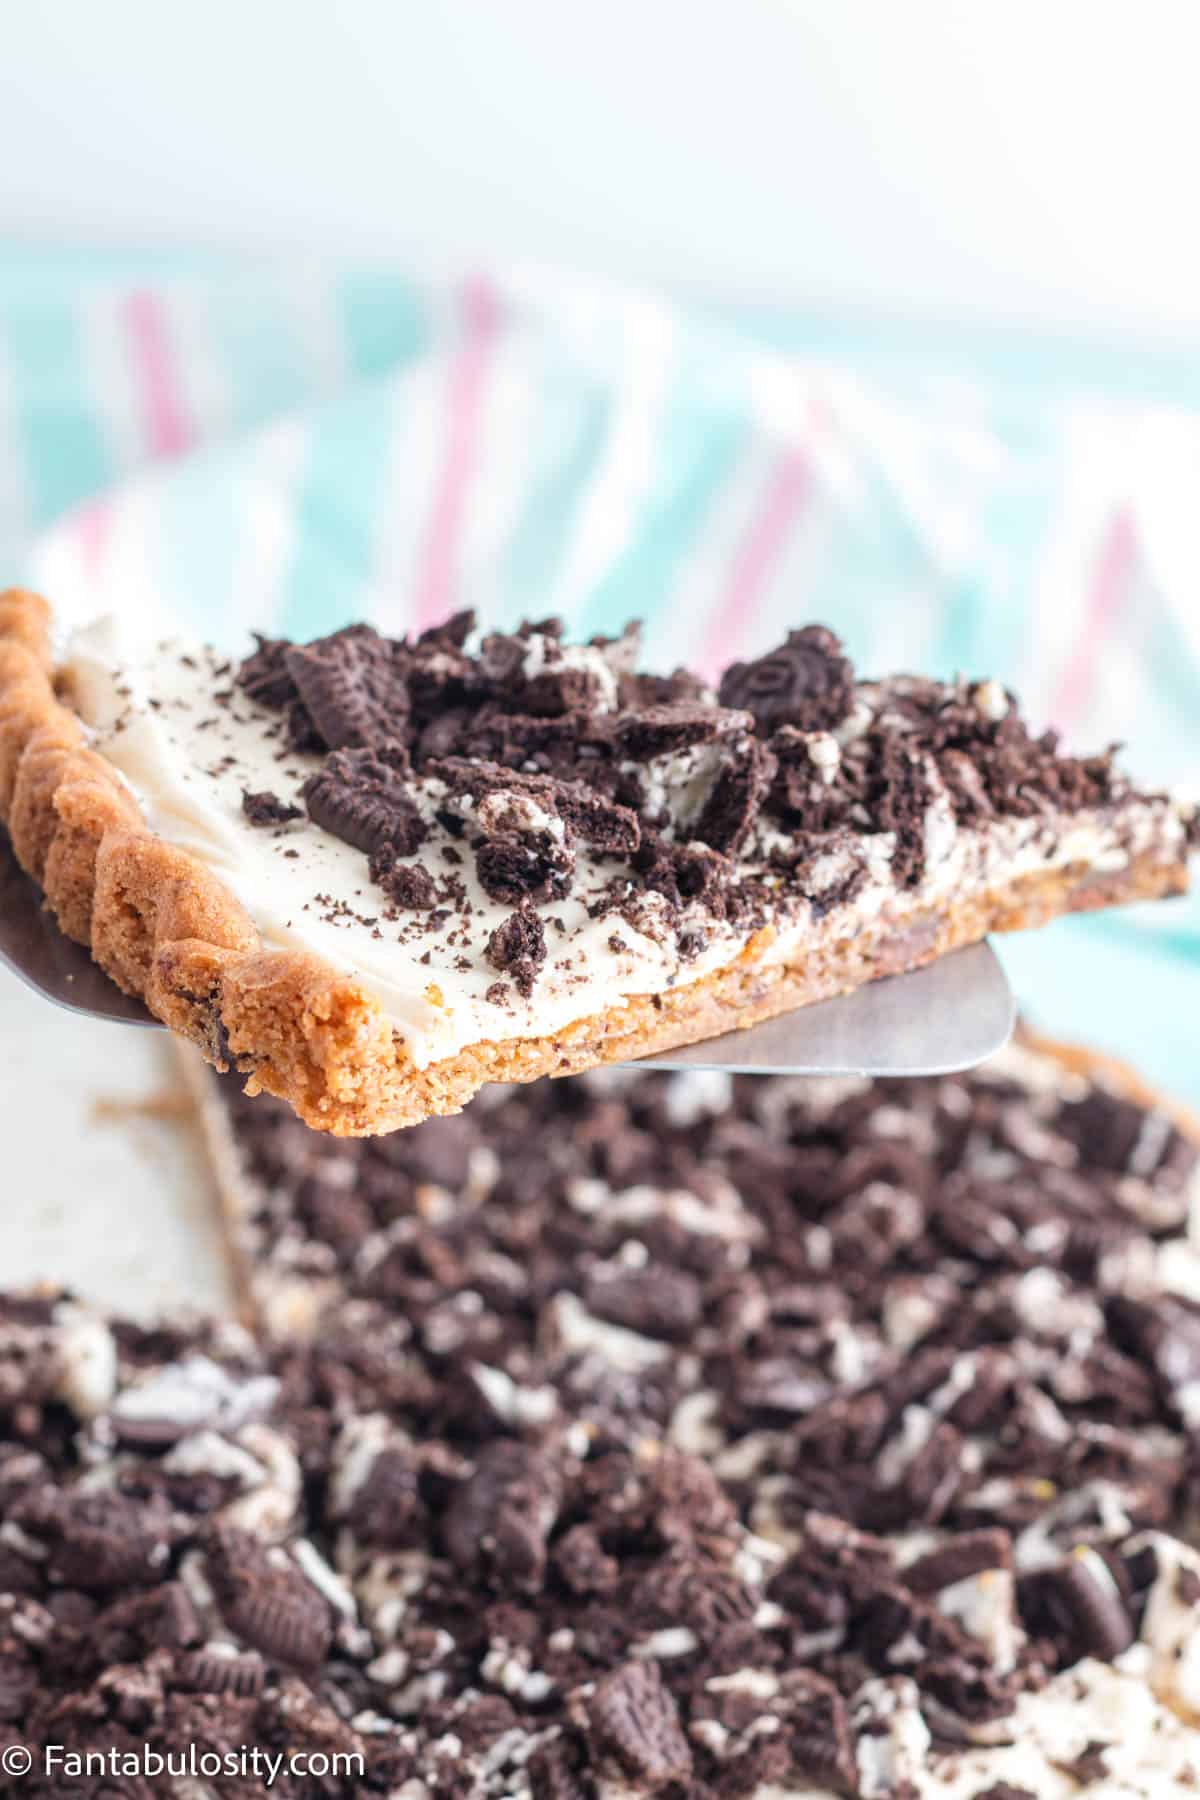 A metal spatula holds a slice of Oreo pizza above the dessert